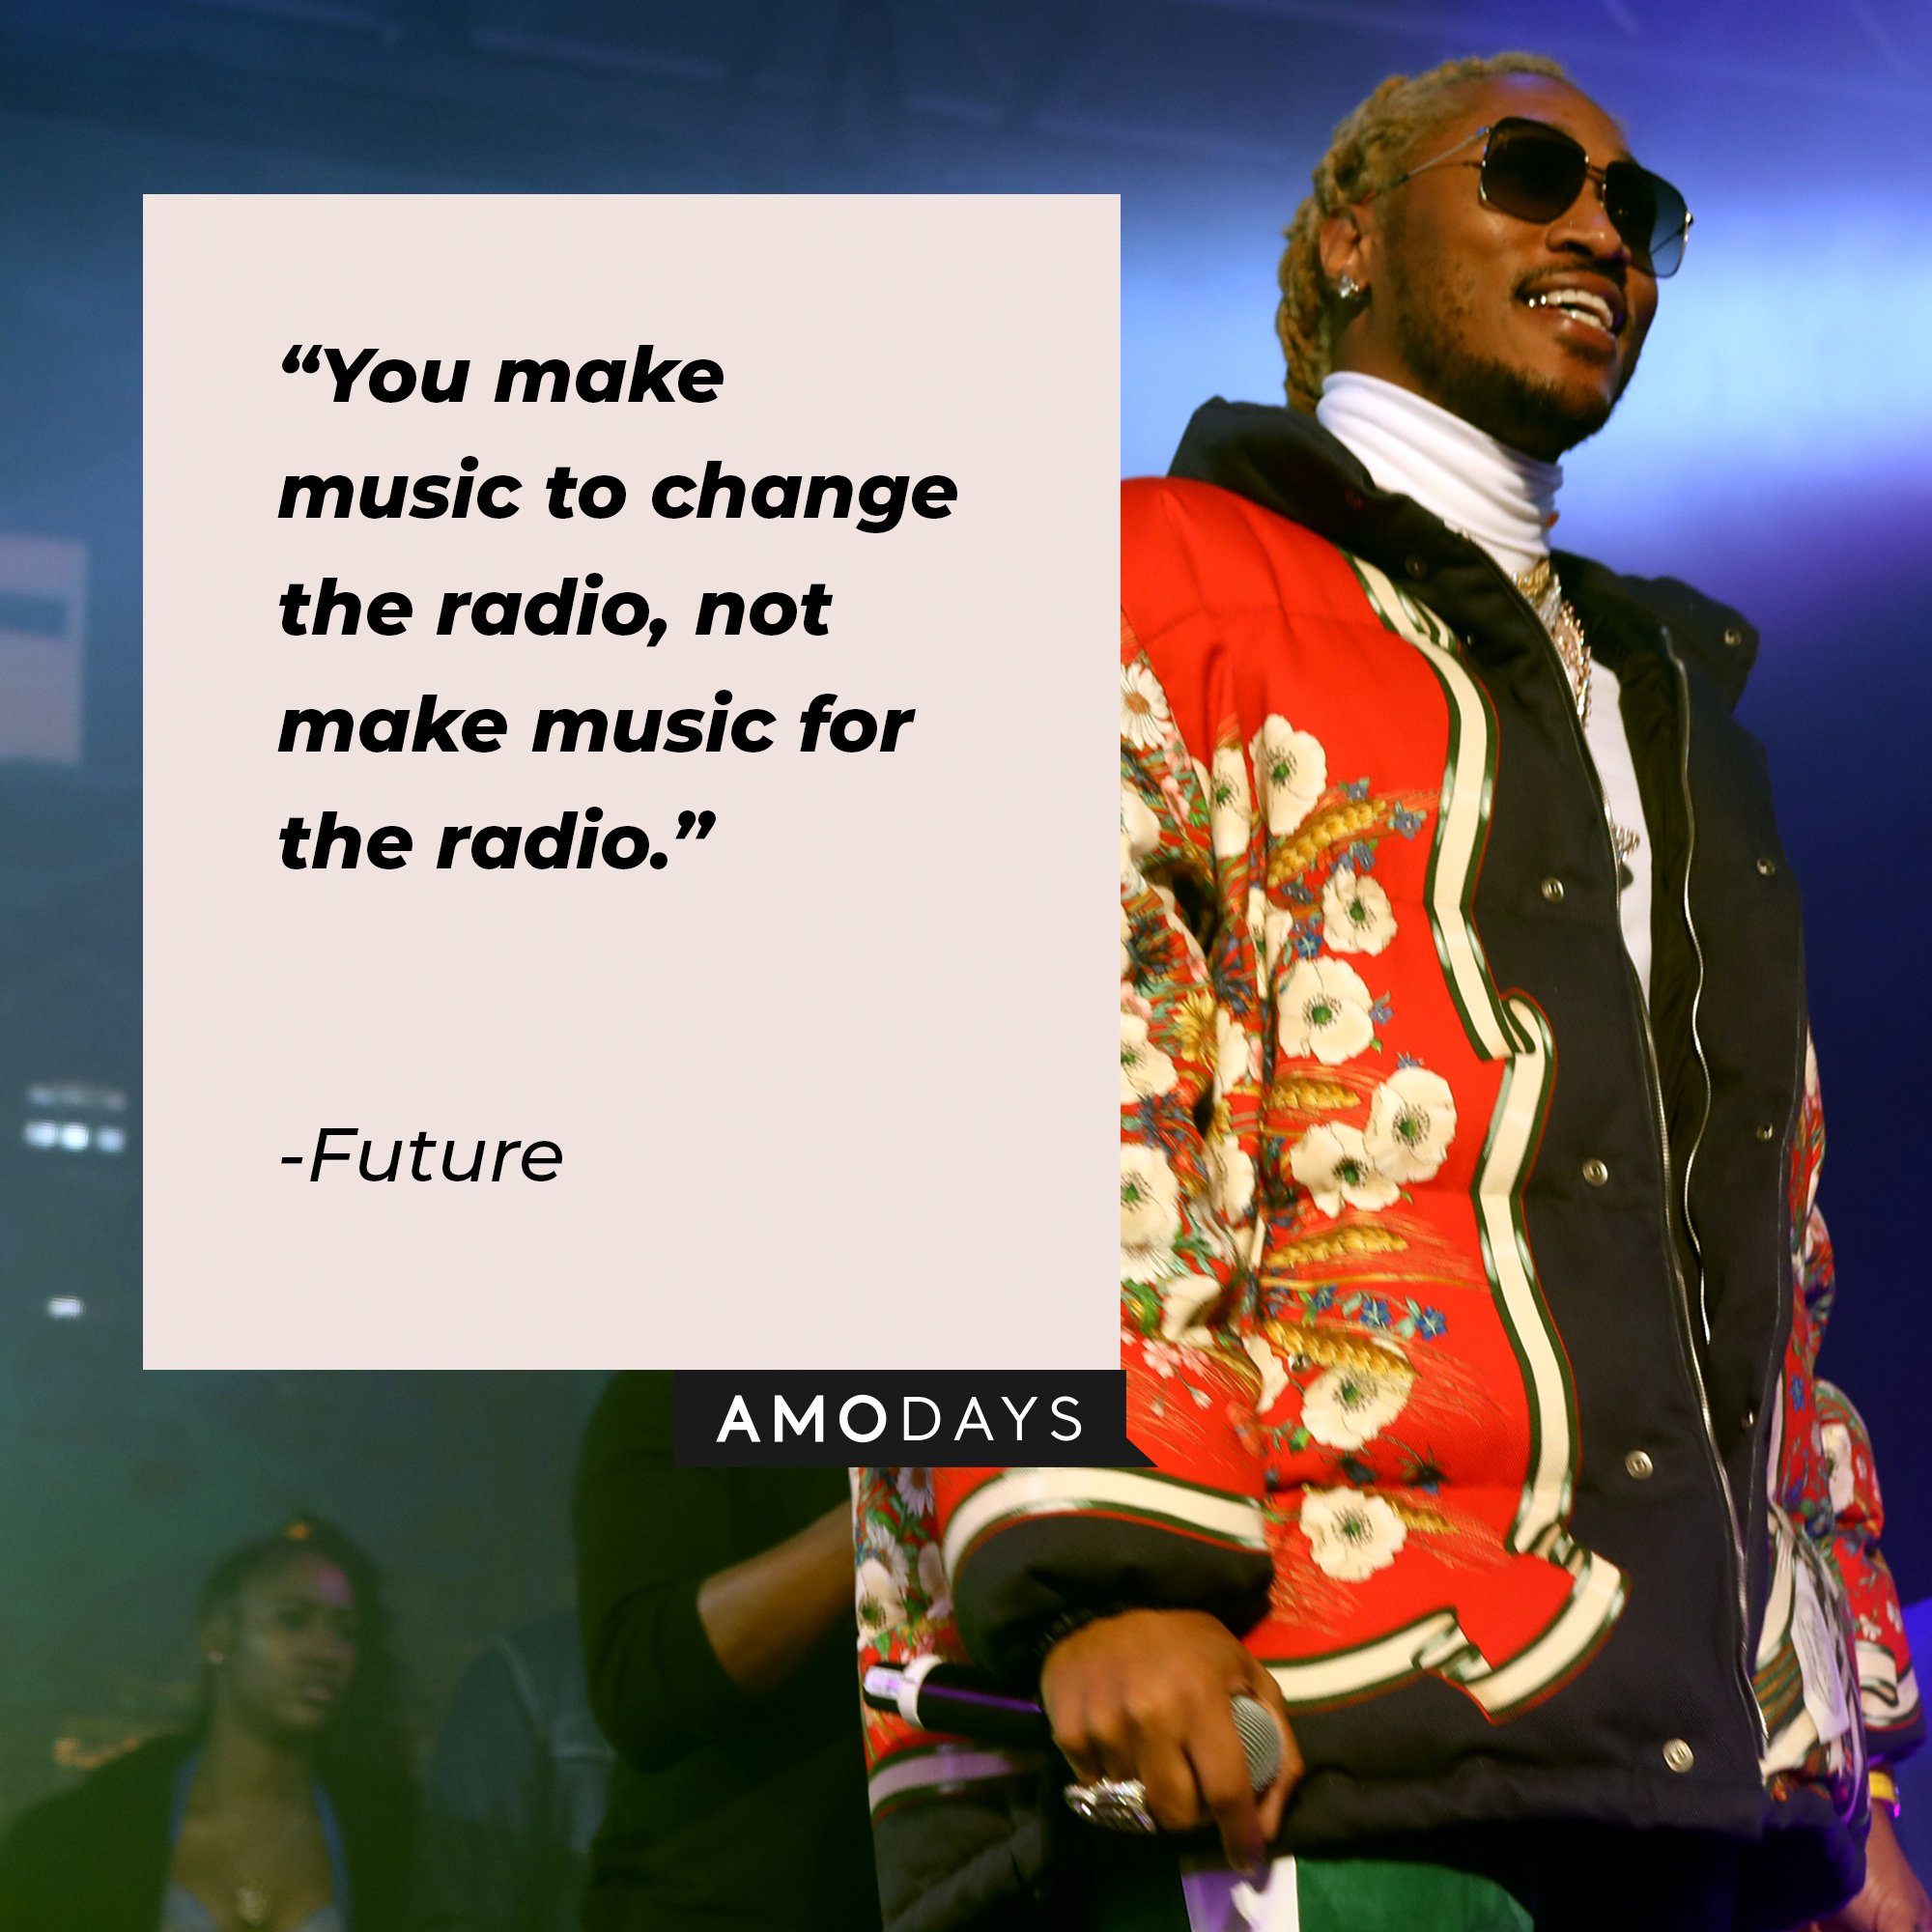 Future’s quote: "You make music to change the radio, not make music for the radio." | Image: AmoDays